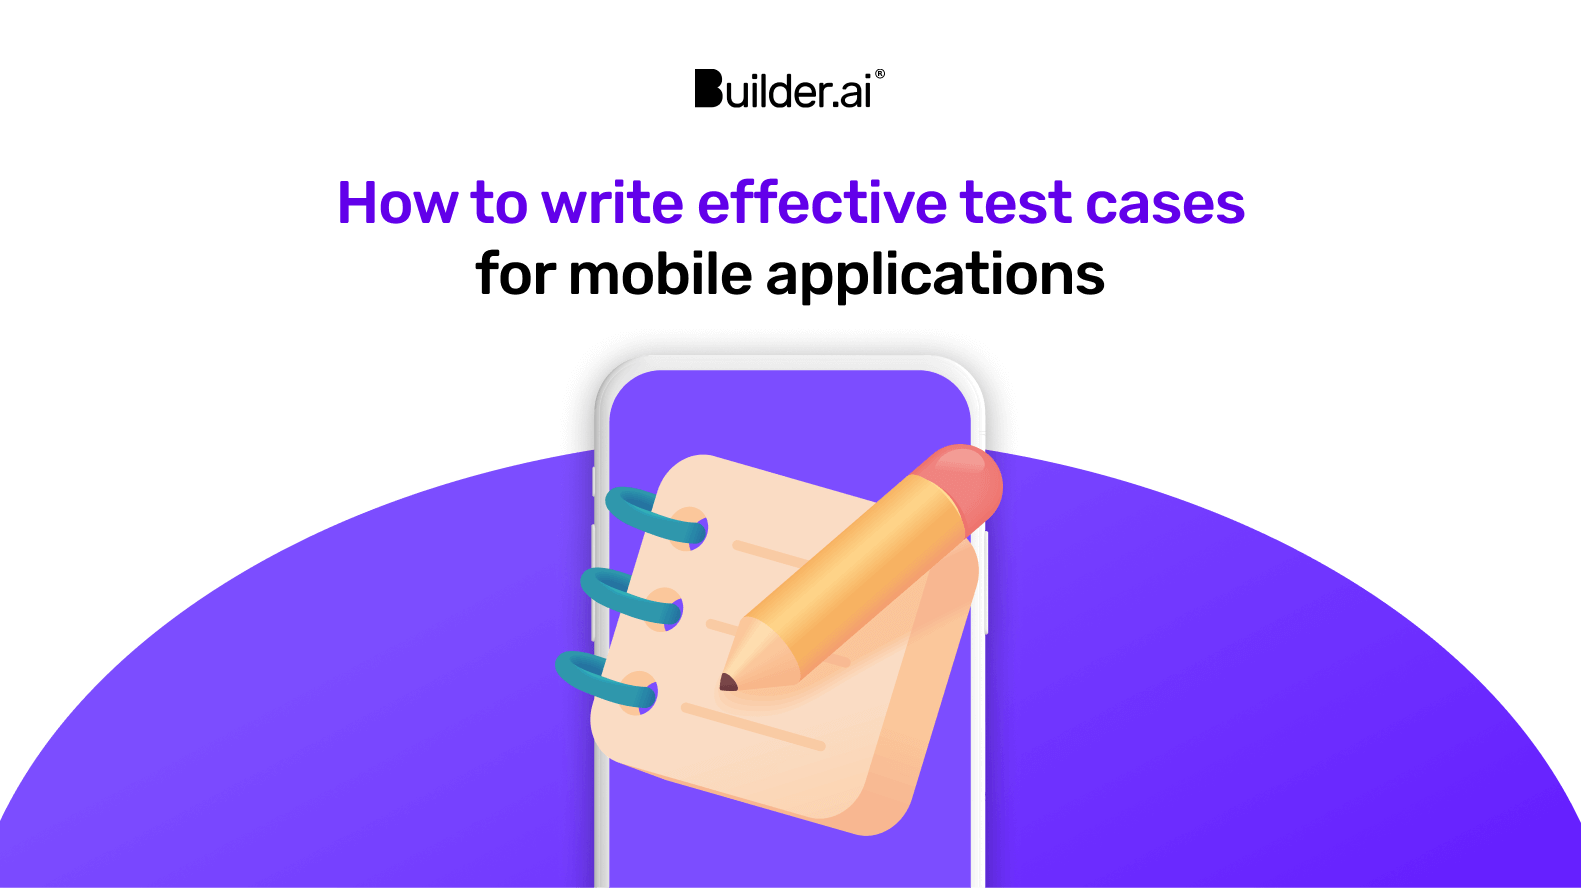 How to write effective test cases for mobile applications (examples, benefits and more)